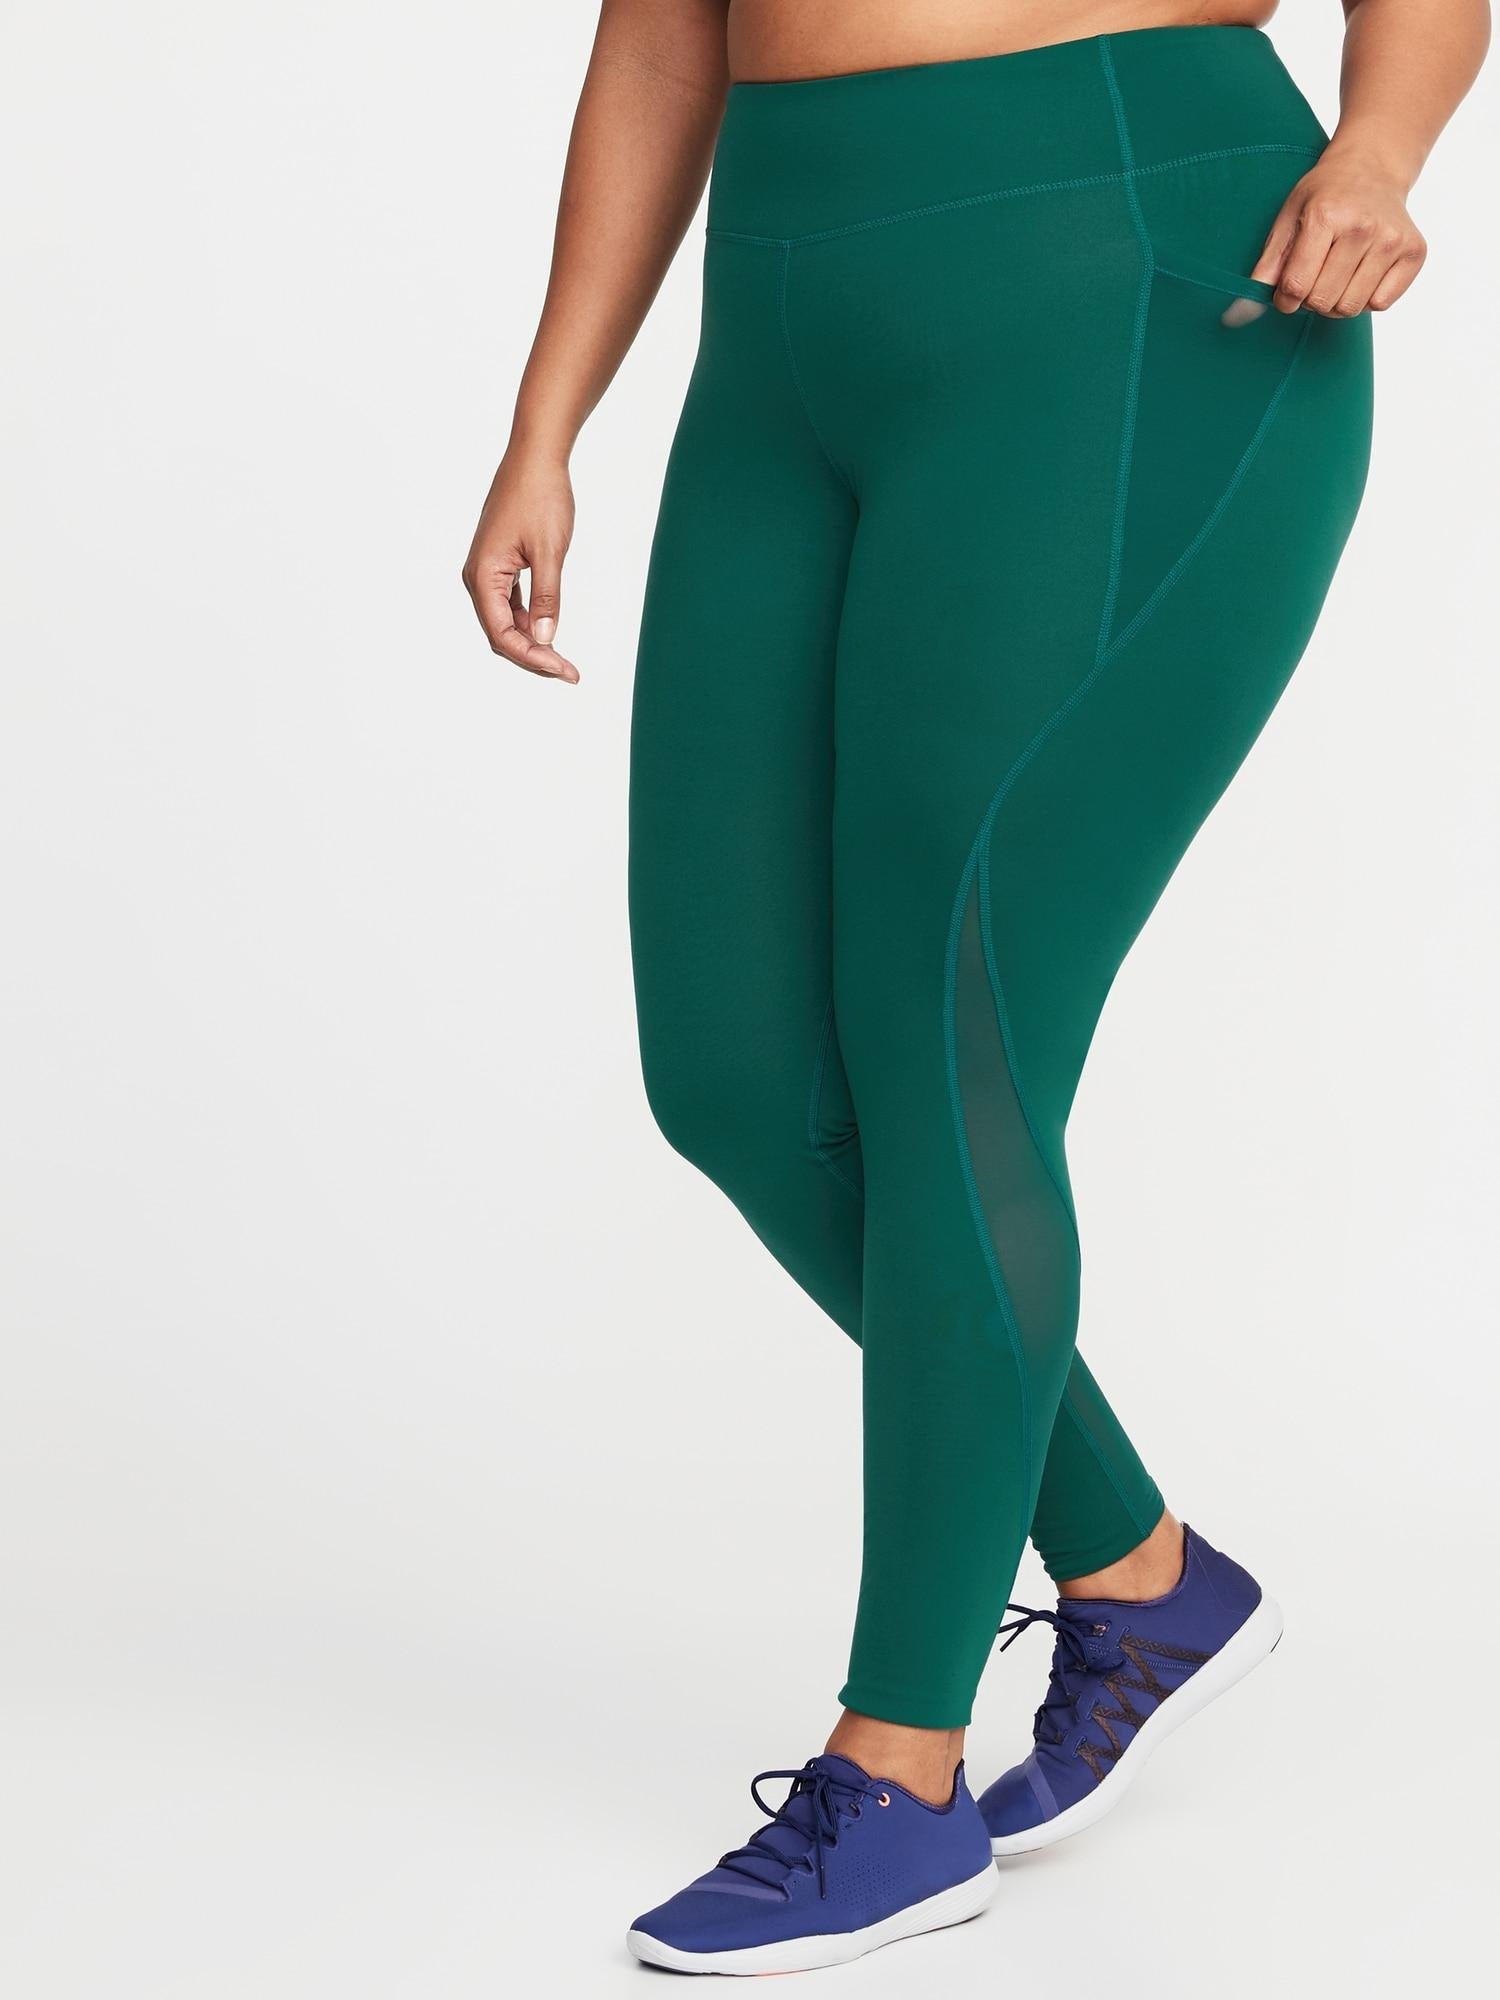 Plus Size Compression Leggings For Traveling  International Society of  Precision Agriculture